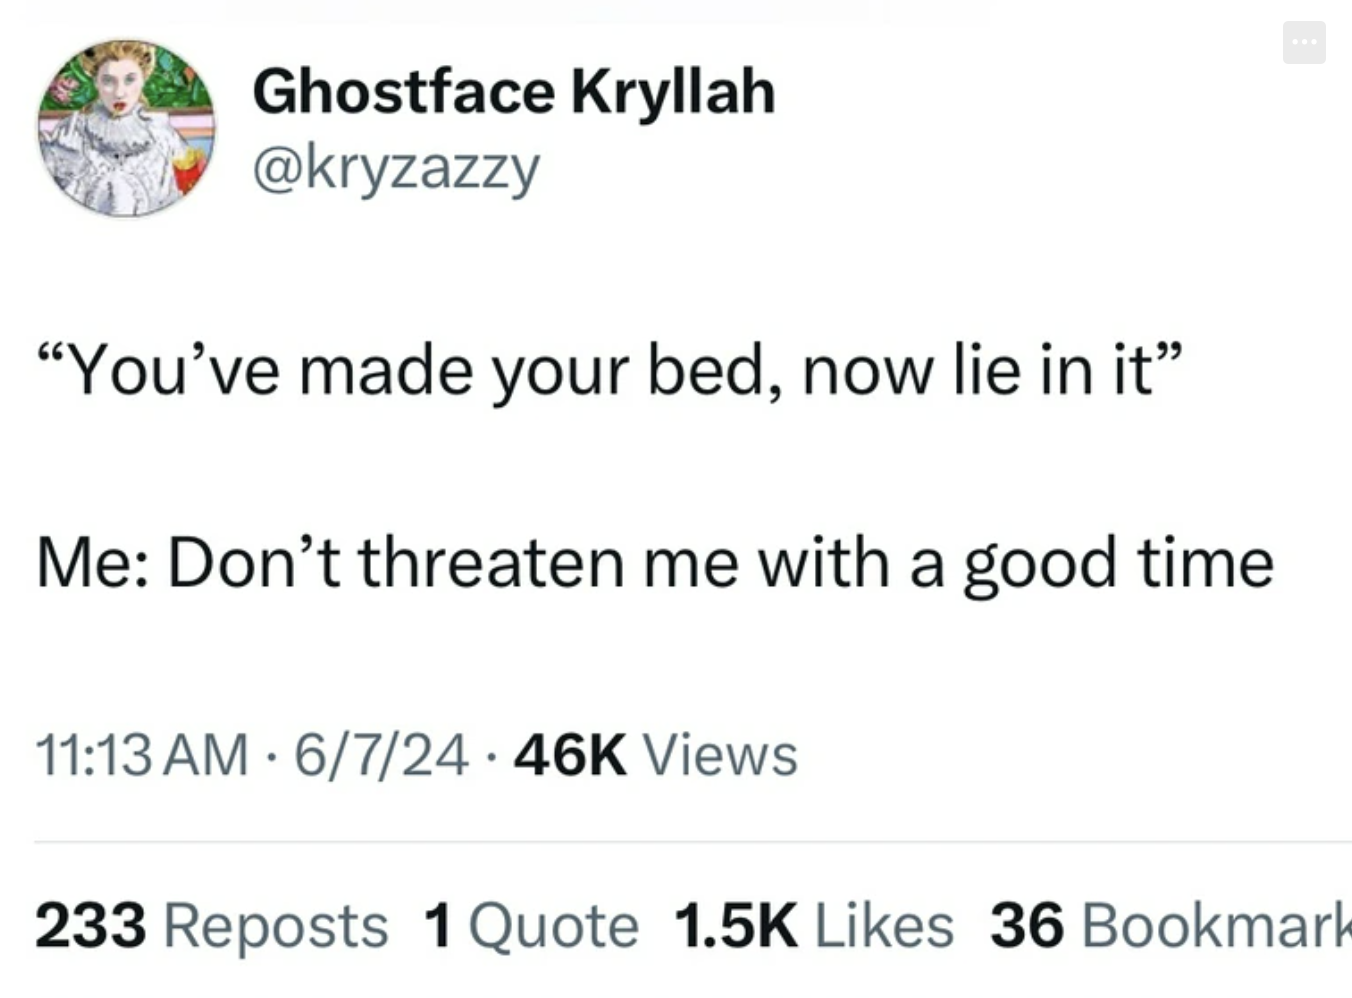 screenshot - Ghostface Kryllah "You've made your bed, now lie in it" Me Don't threaten me with a good time 67 Views . 233 Reposts 1 Quote 36 Bookmark